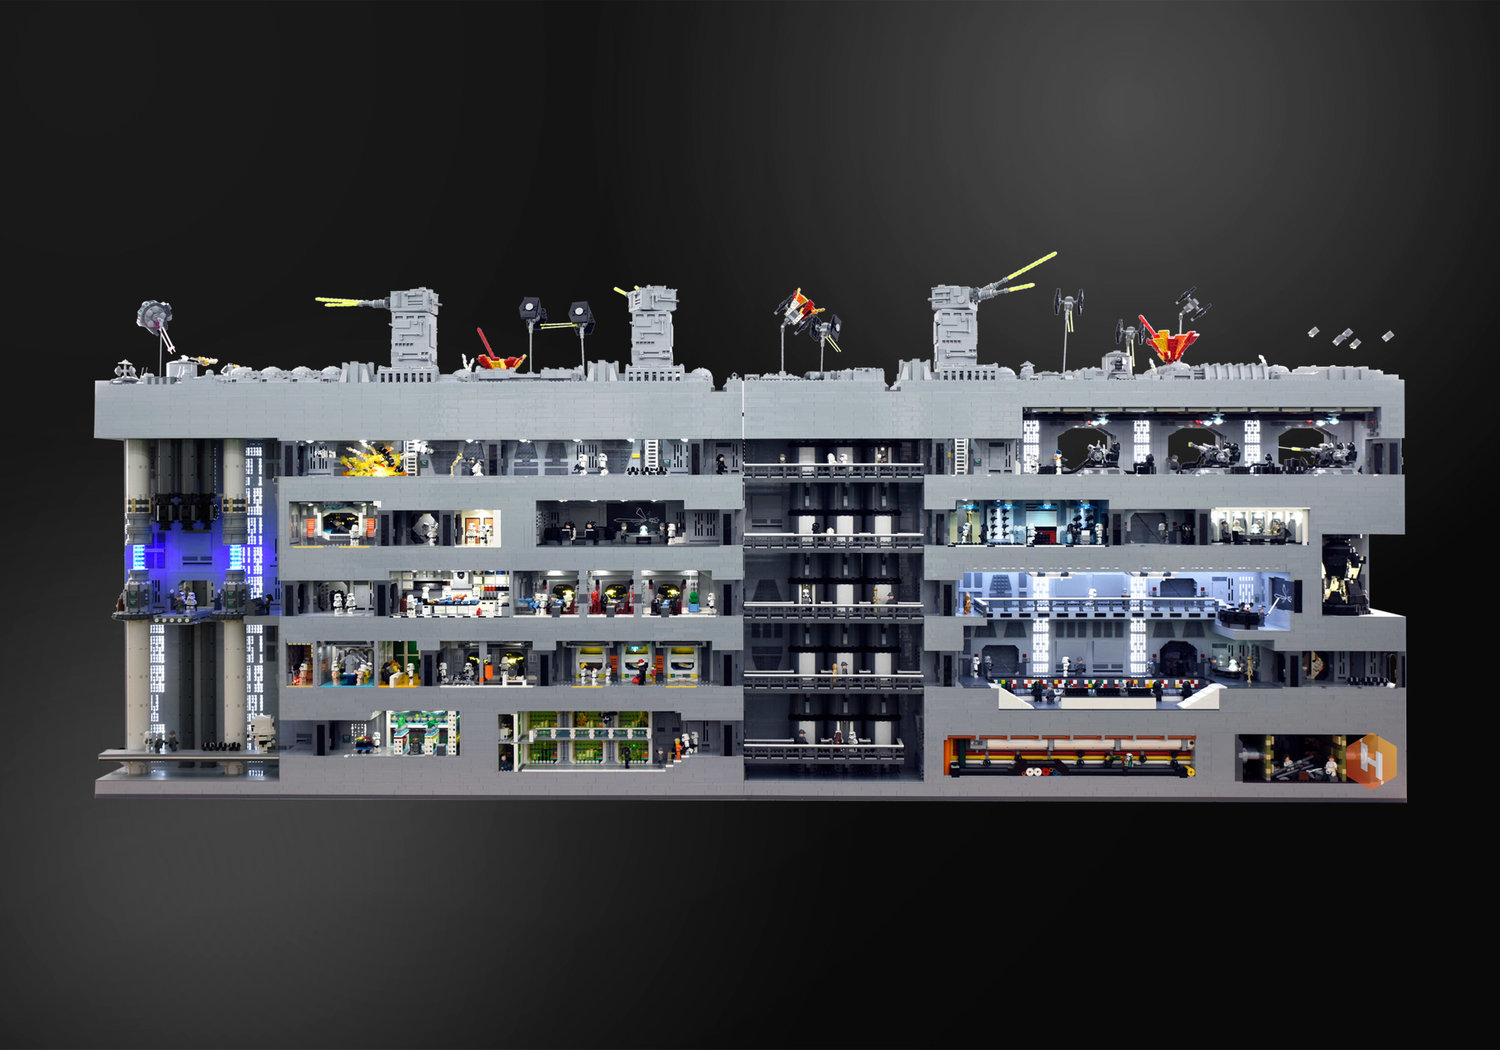 super-detailed-lego-diorama-of-the-star-wars-death-star-trench-run-stays-on-target6